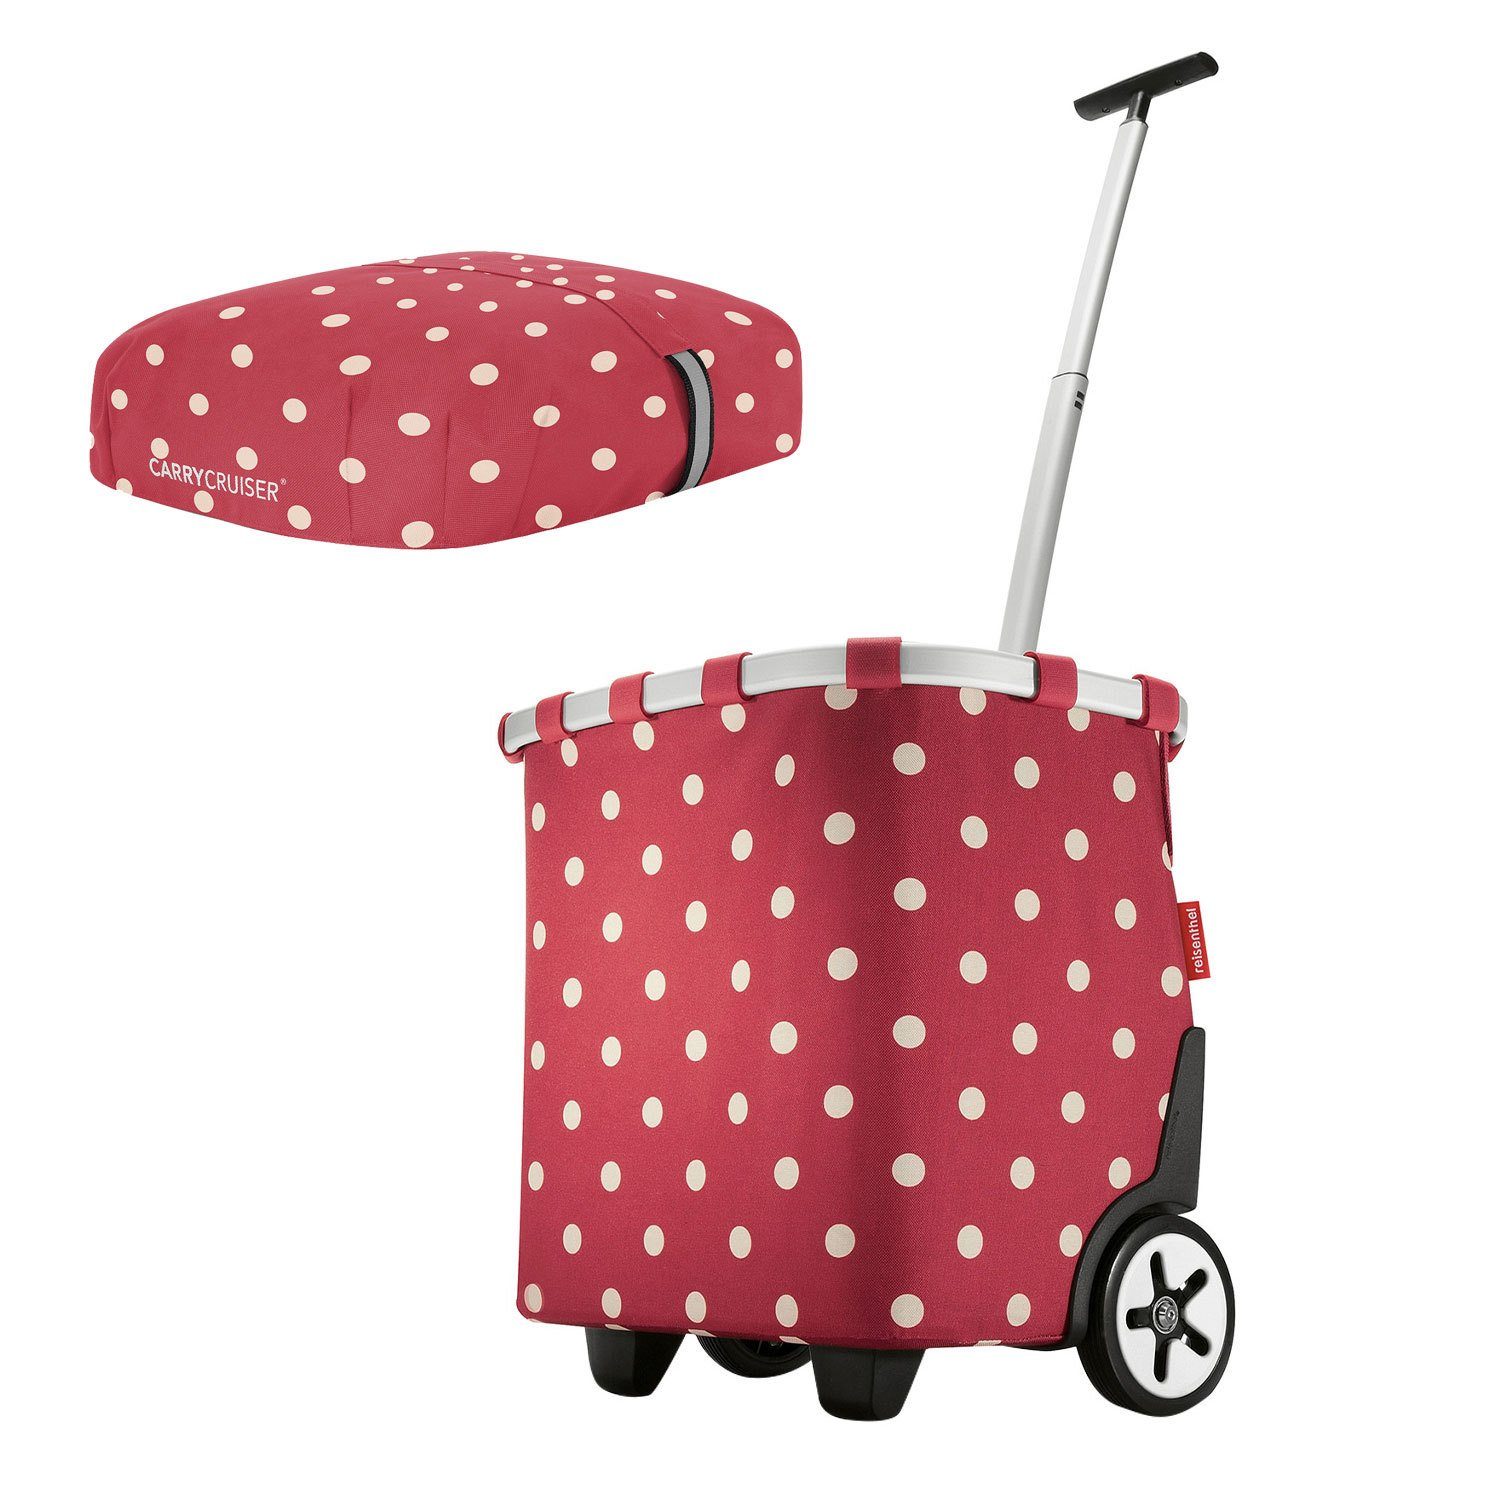 Roestig Encyclopedie cent REISENTHEL® Einkaufstrolley reisenthel carrycruiser 40 Liter  Einkaufstrolley + cover ruby dots